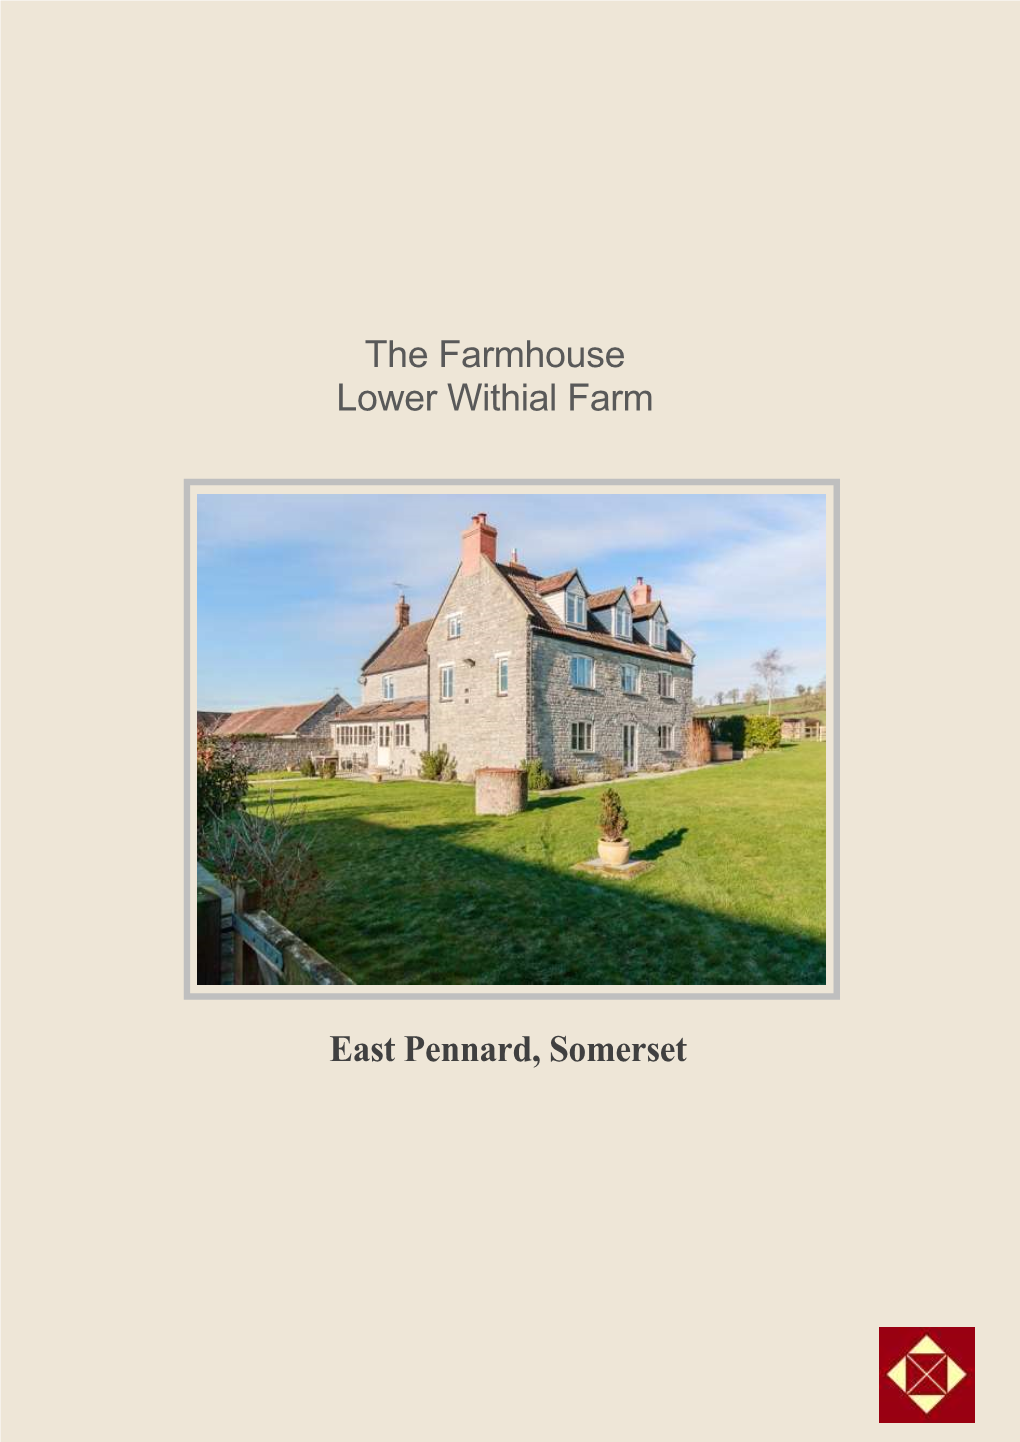 The Farmhouse Lower Withial Farm East Pennard, Somerset